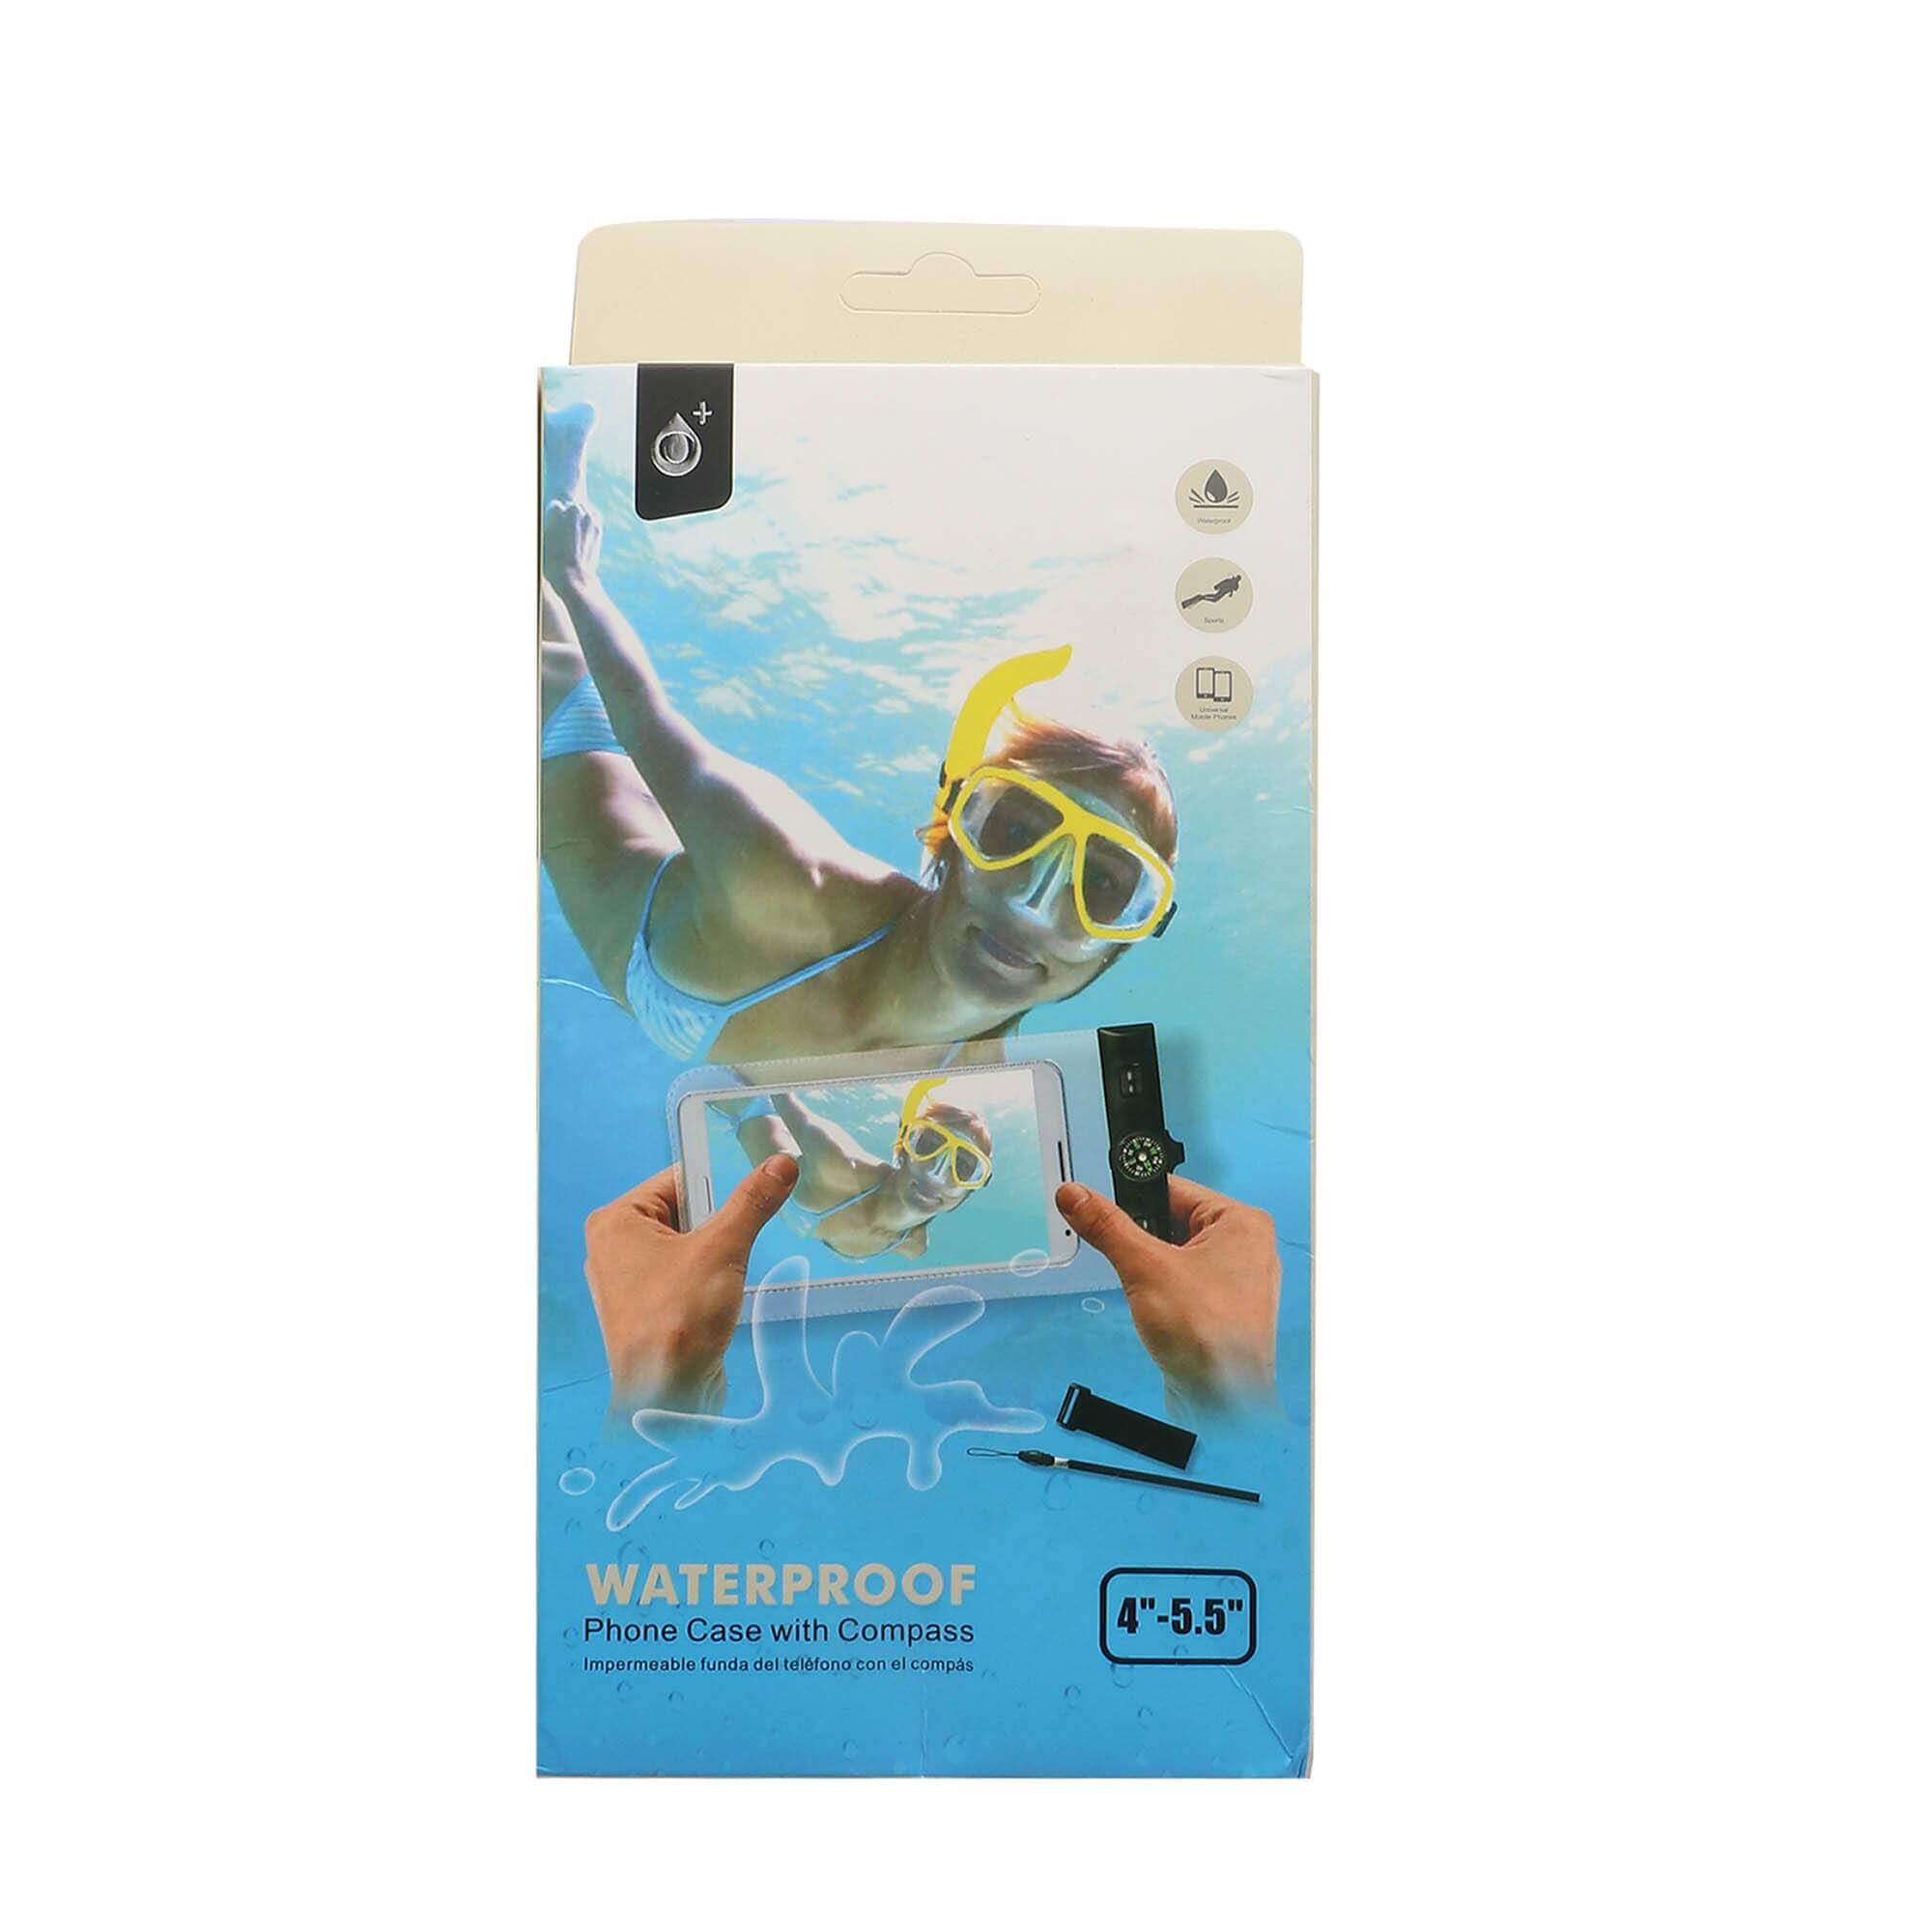 MTK J6017 Waterproof Bag with Compass for iPhone6 Plus